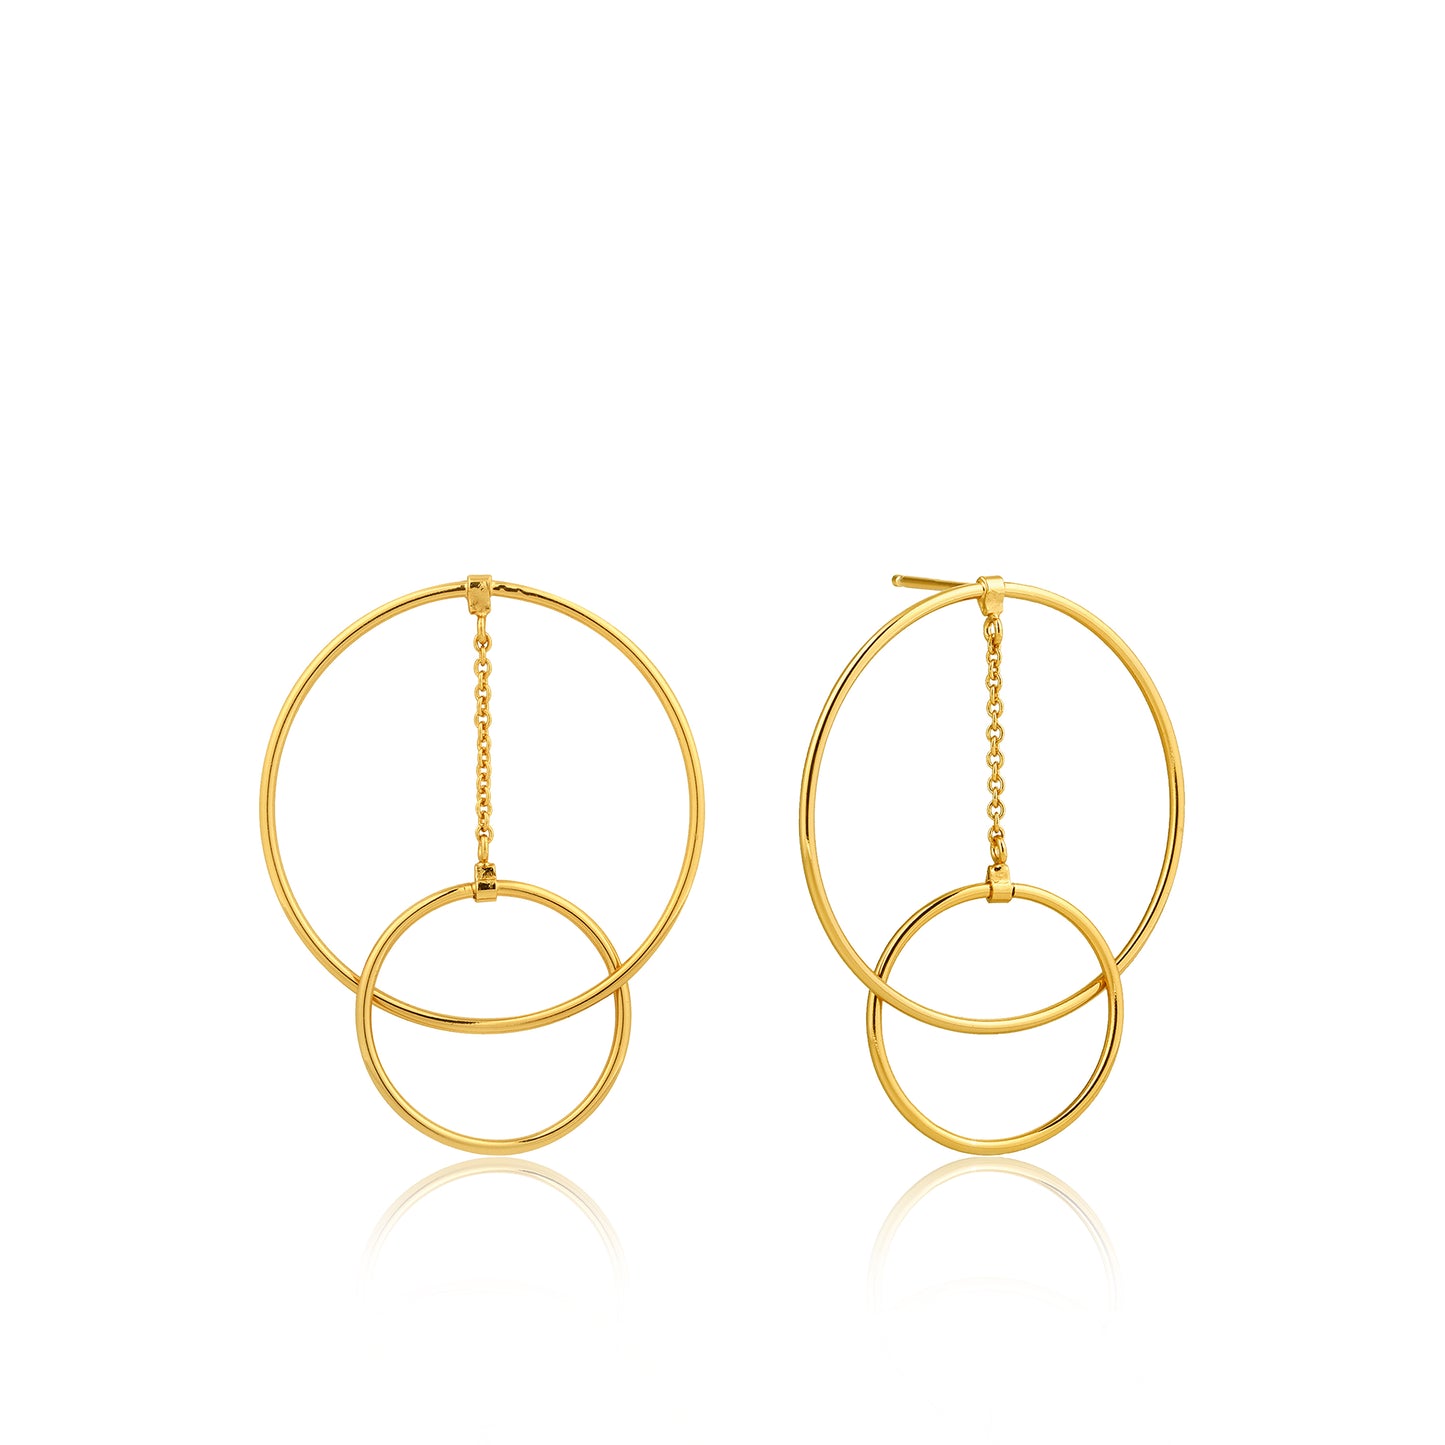 ANIA HAIE ANIA HAIE - Gold Modern Front Hoop Earrings available at The Good Life Boutique